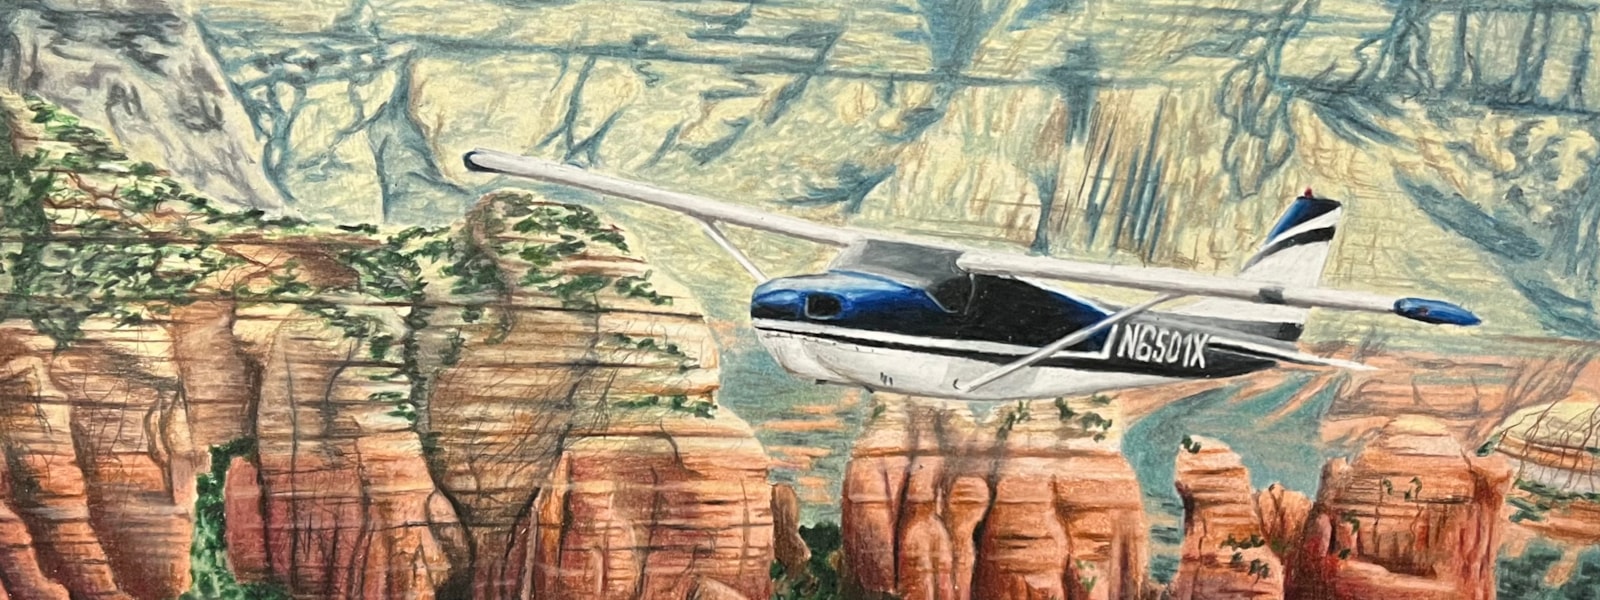 colored pencil drawing of a small plane flying over the Sedona red rocks